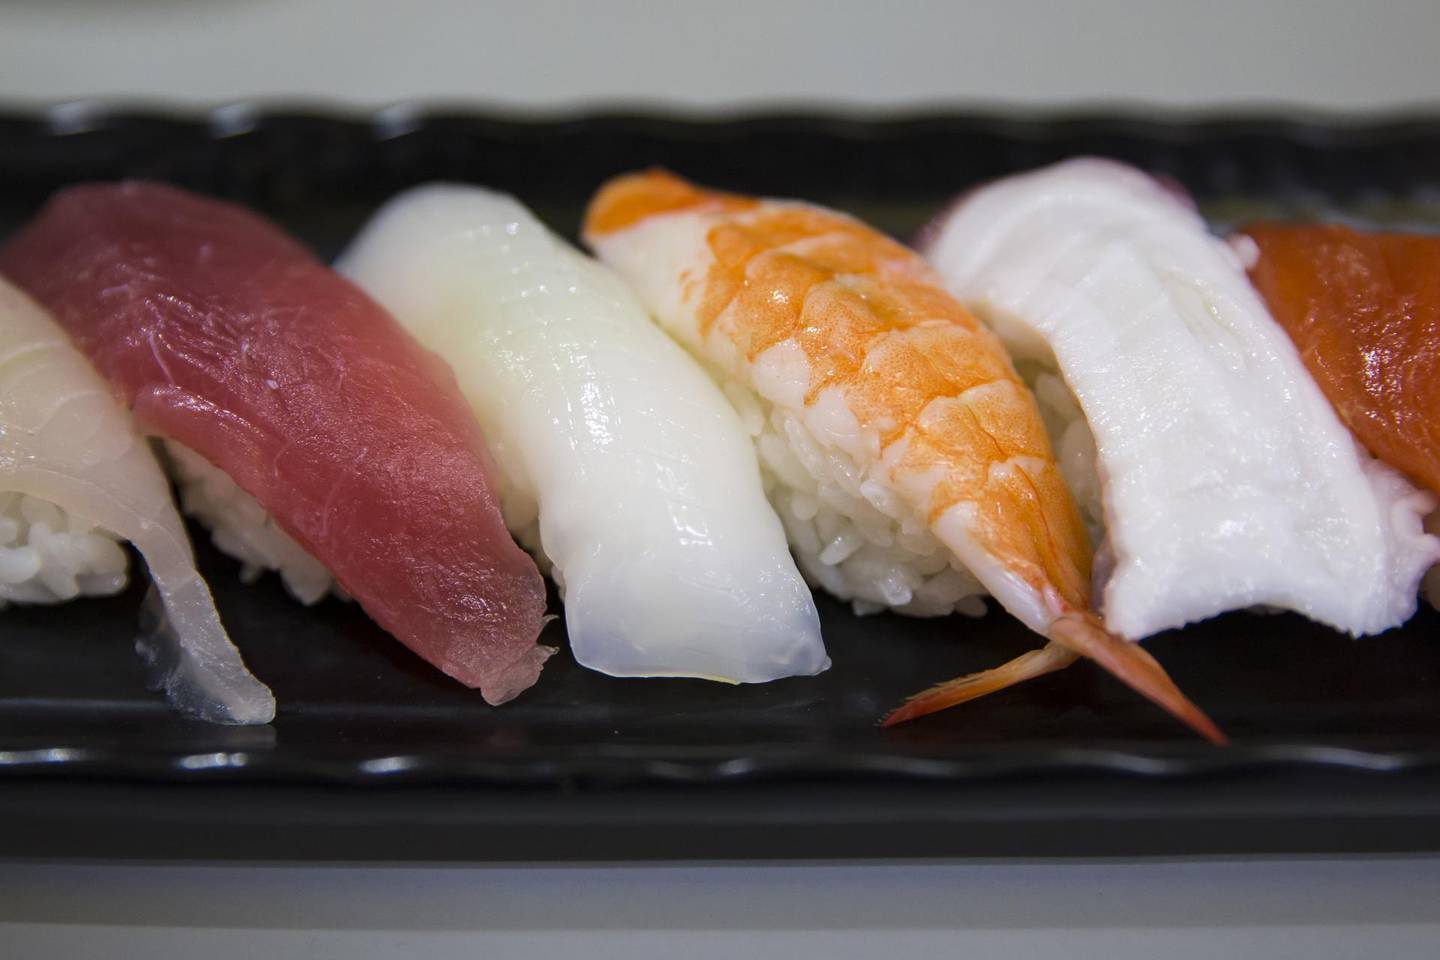 A plate of sushi is served at a sushi restaurant at Tsukiji Outer Market in Tokyo, Japan, on Thursday, Sept. 27, 2018.  After more than 80 years, on Oct. 6, Tokyo's iconic��Tsukiji��fish��market will close and relocate to a new site at Toyosu Market, scheduled to open on Oct. 11. Most businesses are set to make the move but many shops and restaurants surrounding Tsukiji Market will remain at their current location. Photographer: Tomohiro Ohsumi/Bloomberg